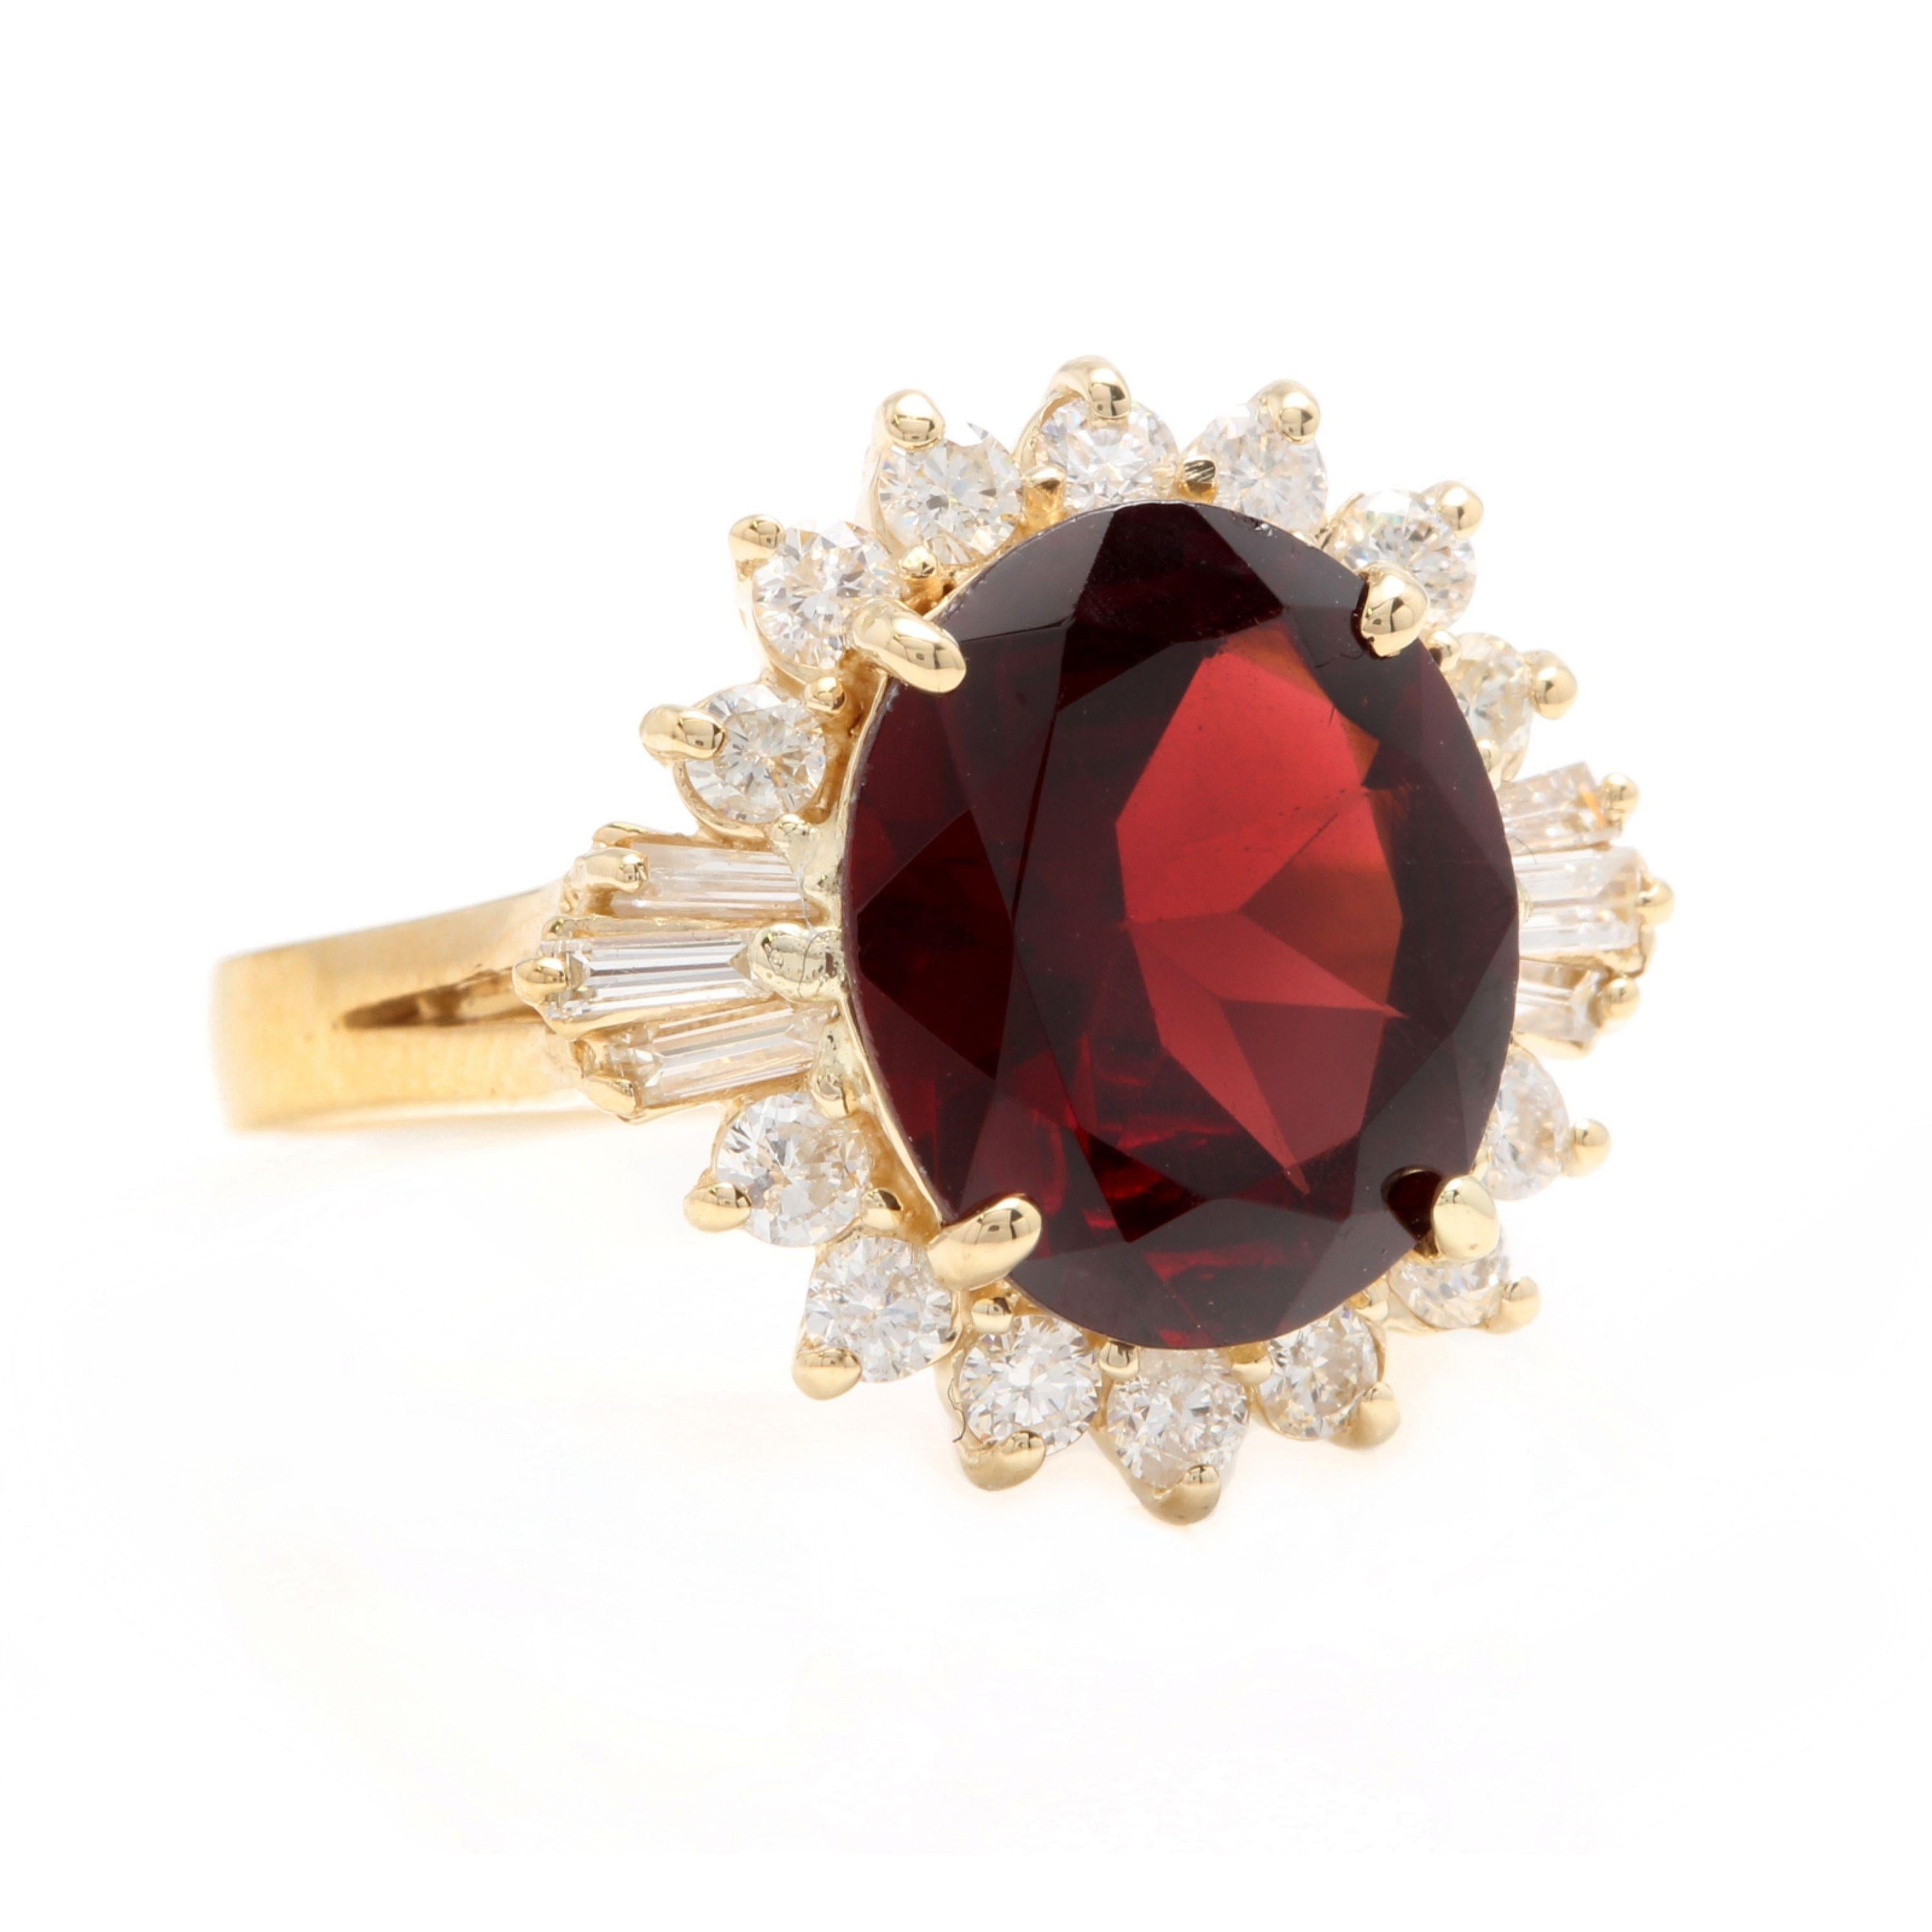 9.60 Carats Impressive Red Garnet and Natural Diamond 14K Yellow Gold Ring

Total Natural Oval Red Garnet Weight is: Approx. 8.50 Carats

Garnet Measures: Approx. 13.00 x 11.00mm

Natural Round & Baguette Diamonds Weight: Approx. 1.10 Carats (color